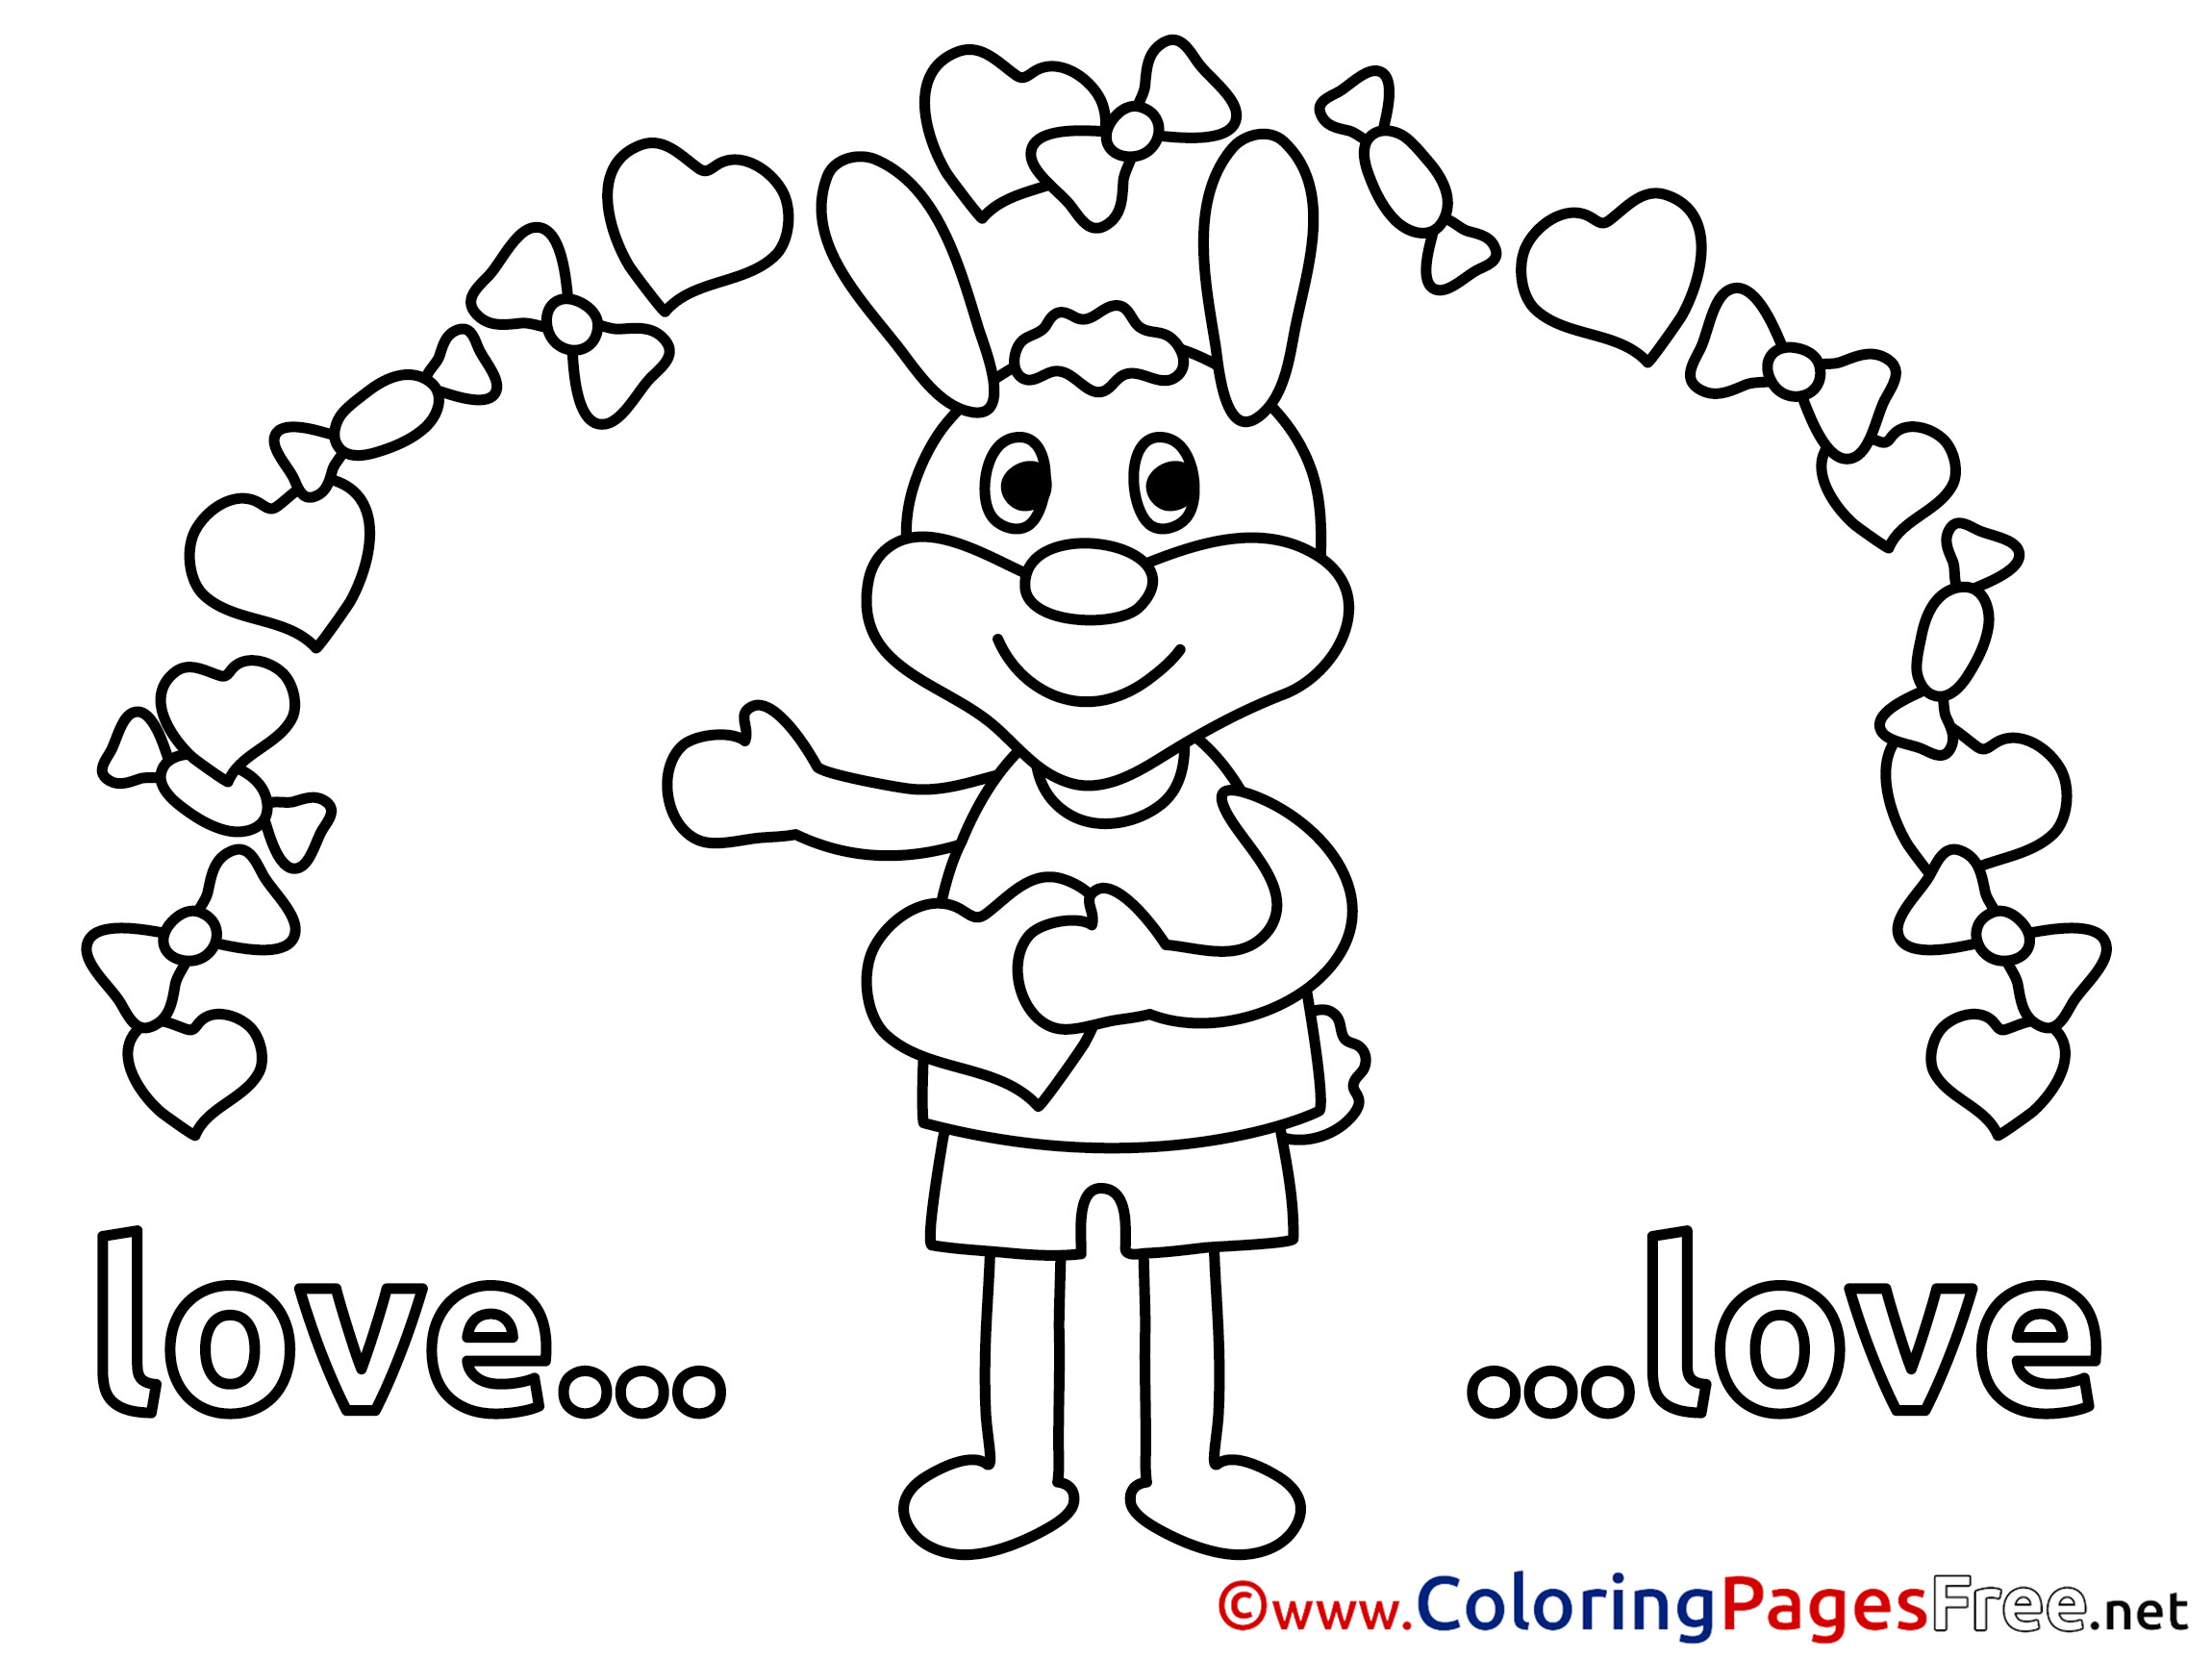 valentina design coloring pages cars - photo #15